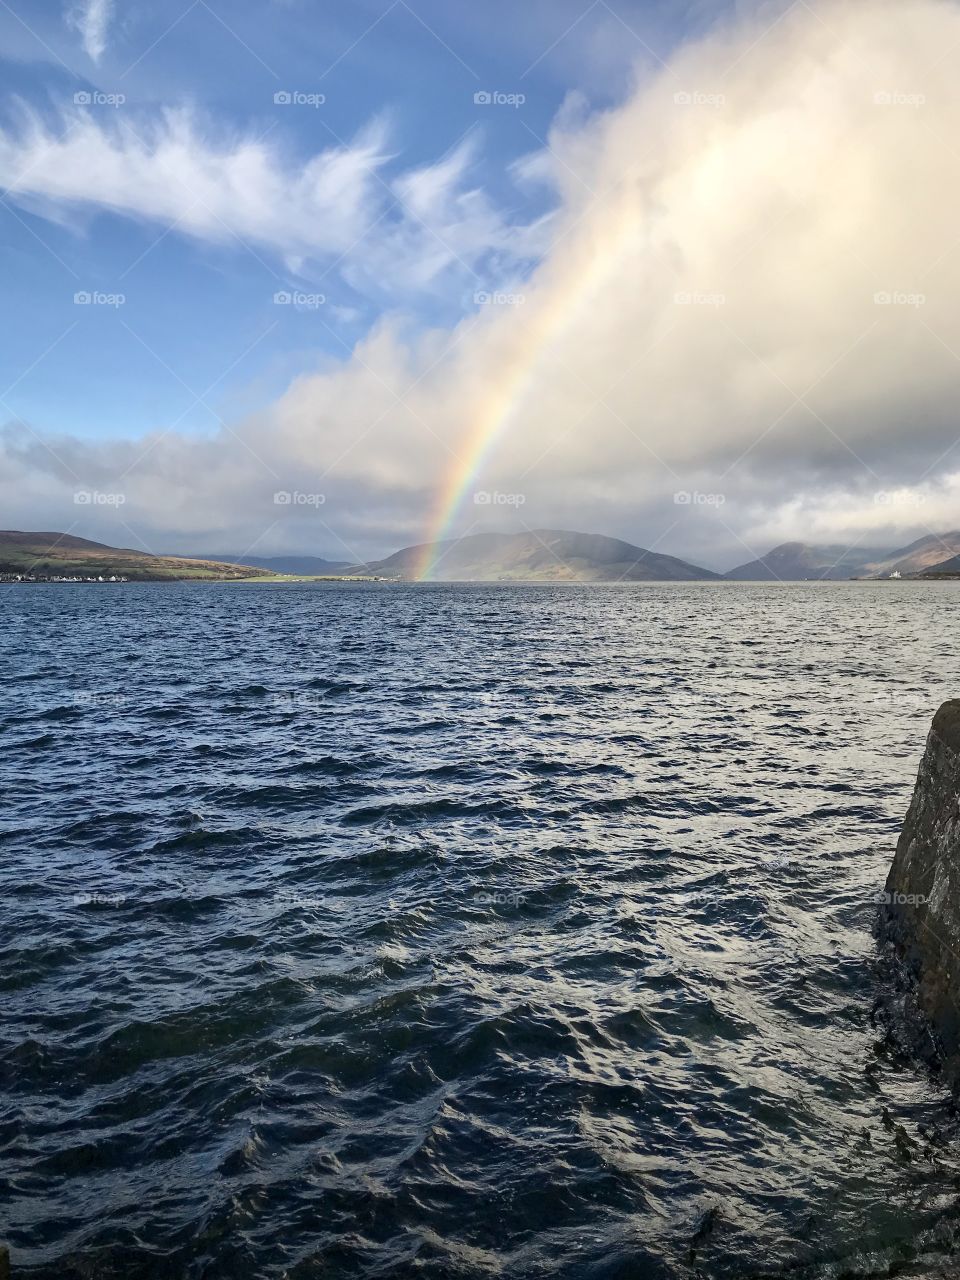 Rainbow over the bay, Rothesay, Isle of Bute, Scotland